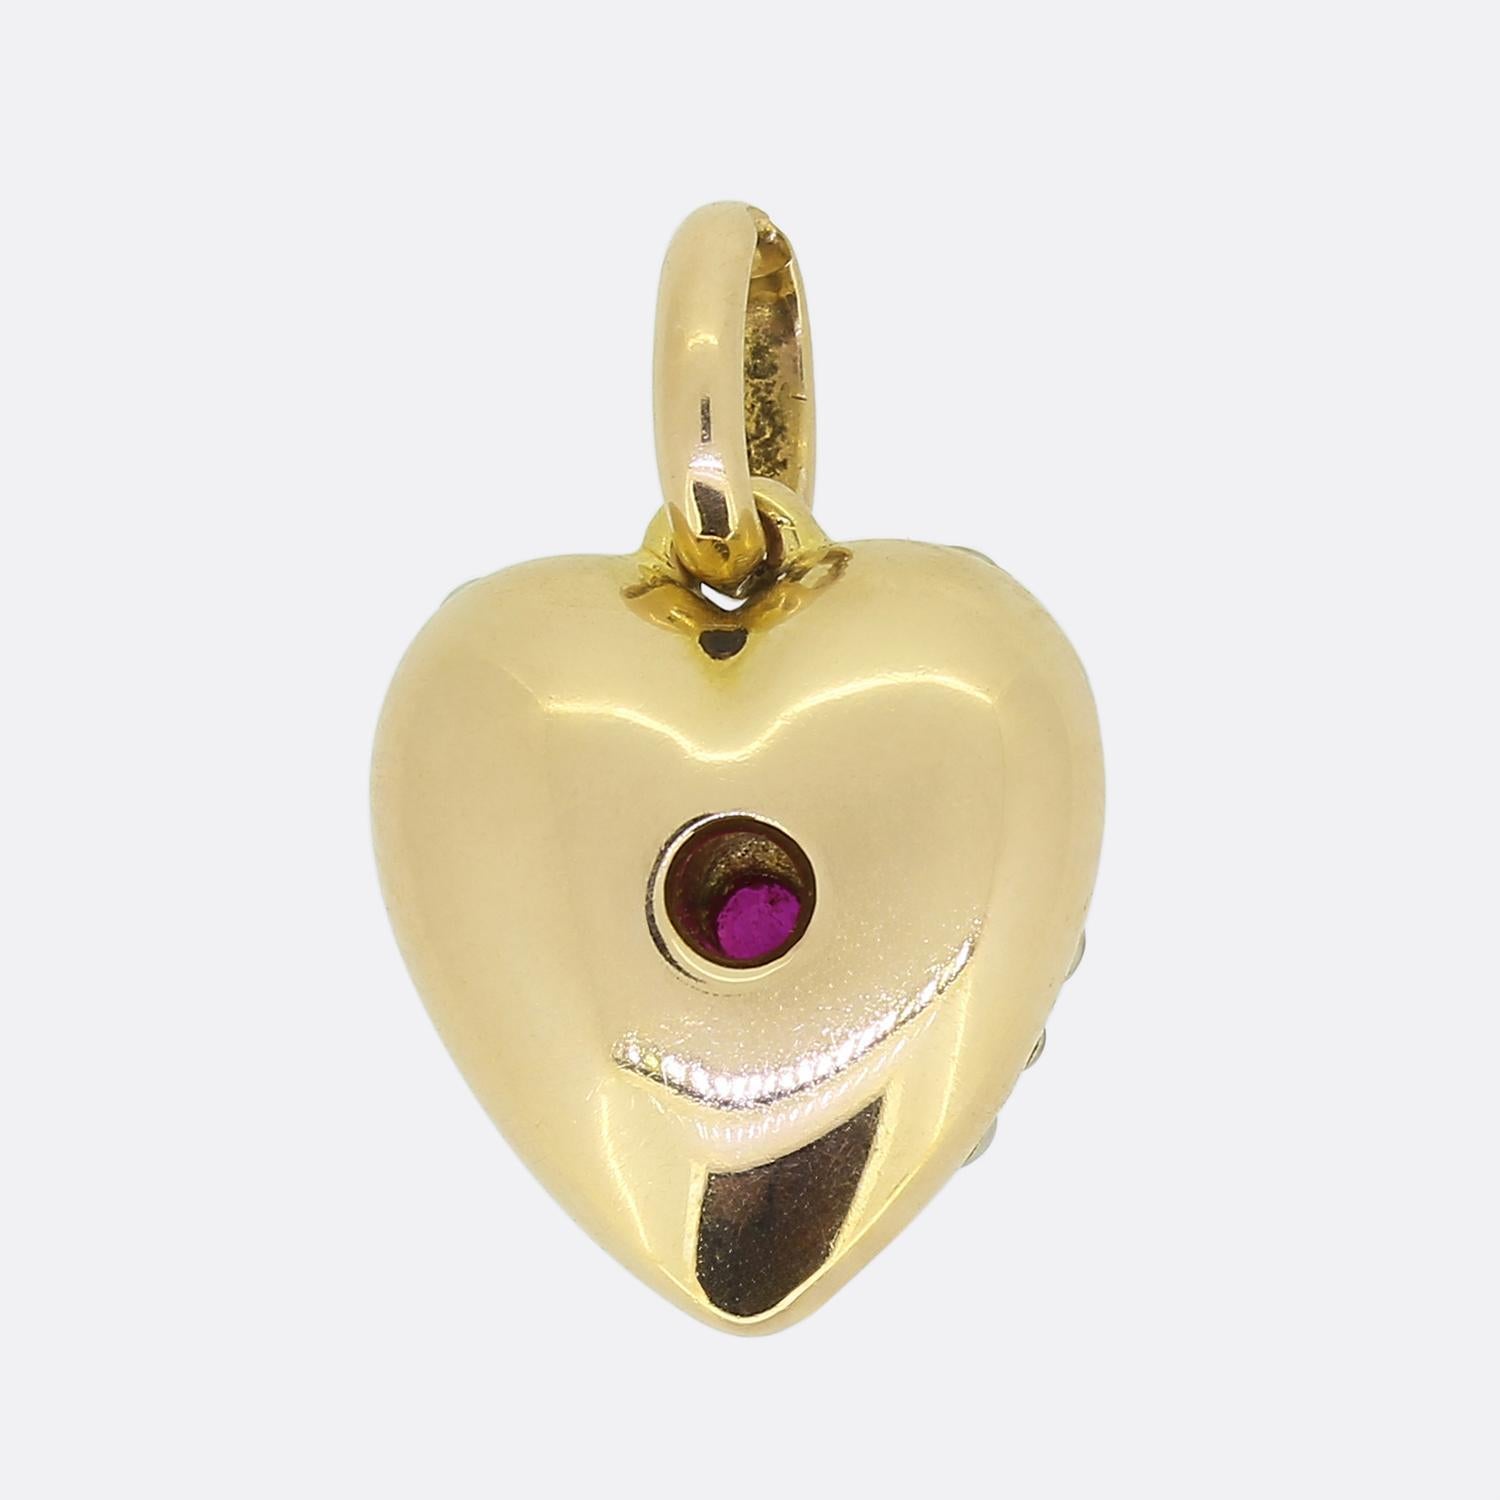 Here we have a charming little pendant dating back to the Victorian period. This antique piece has been crafted from 15ct yellow gold into the shape of a love heart and set with a single round faceted ruby at the centre and surrounding pavé set seed